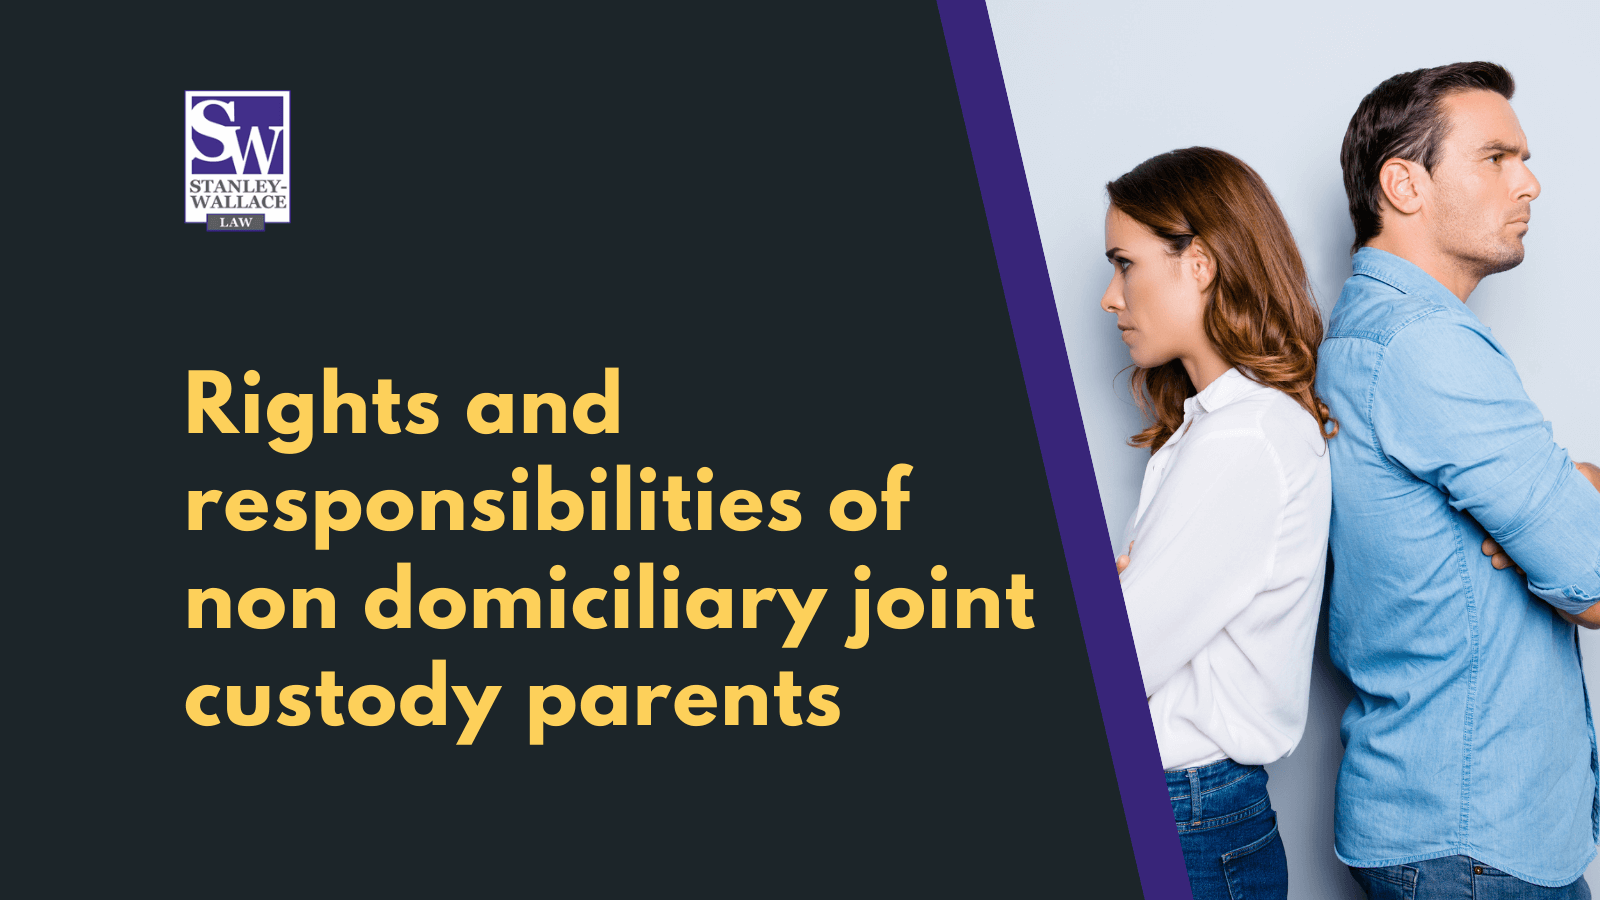 Rights and responsibilities of non domiciliary joint custody parents - Stanley-Wallace Law - slidell louisiana